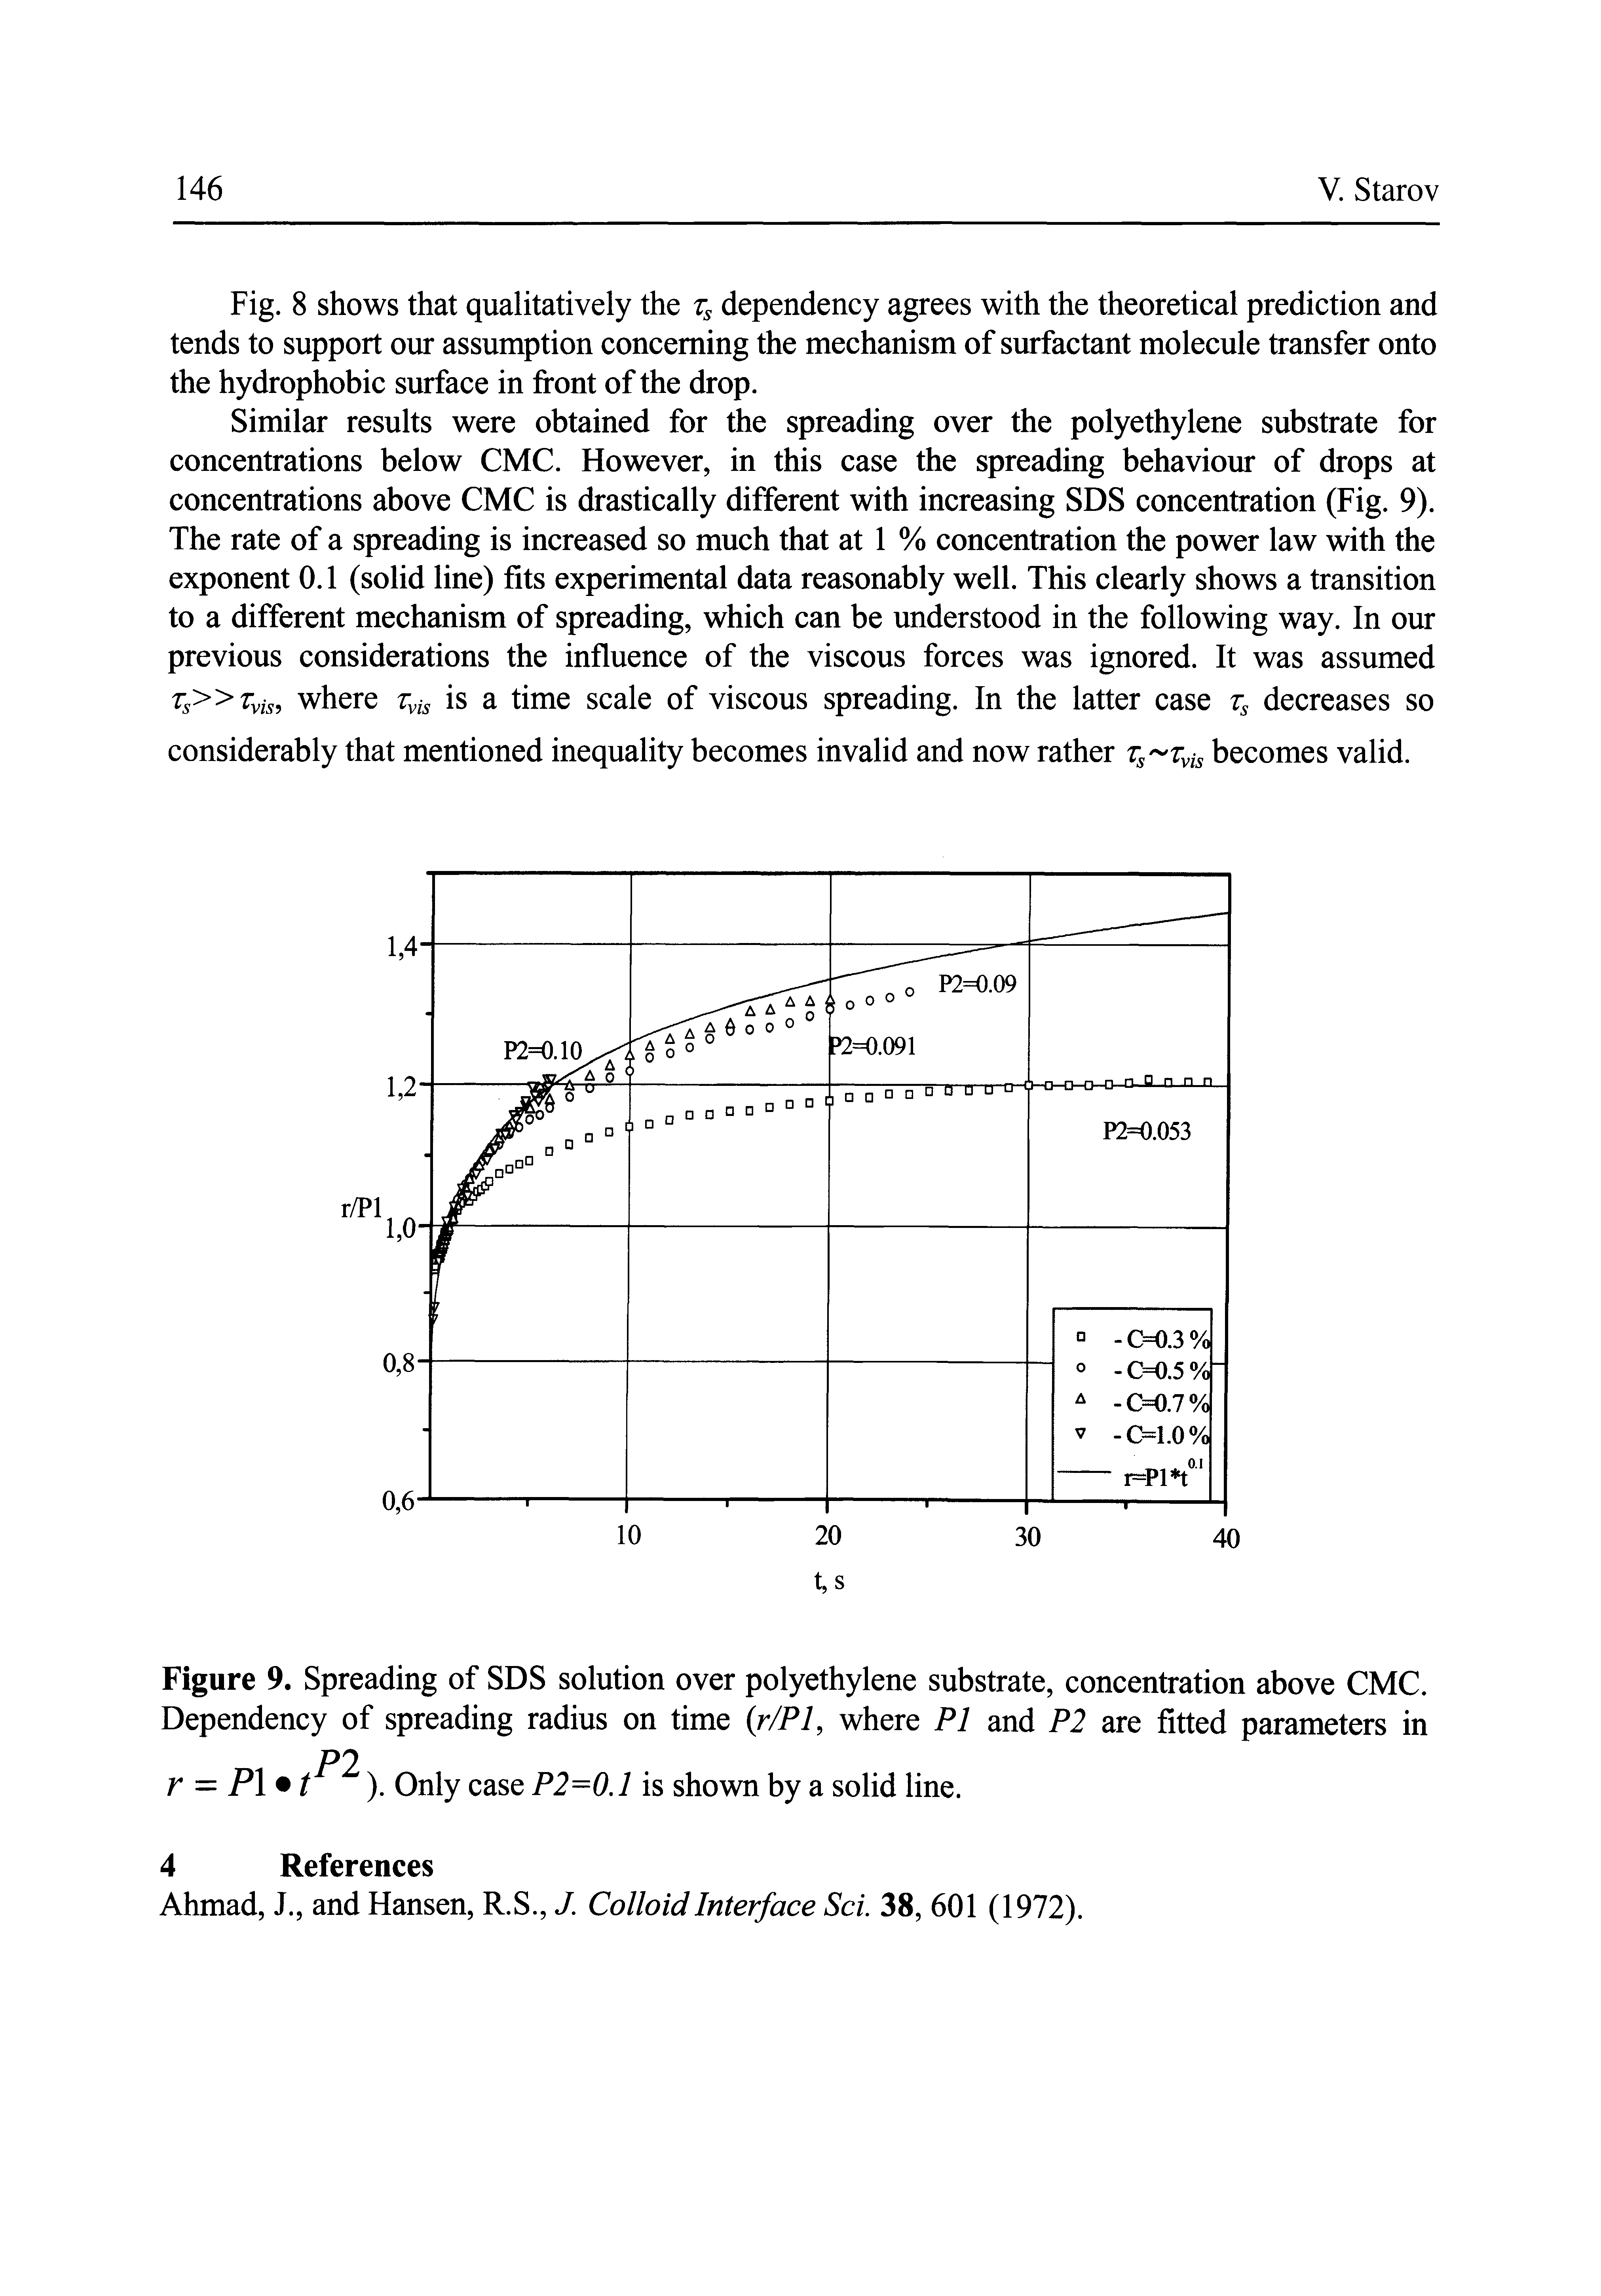 Figure 9. Spreading of SDS solution over polyethylene substrate, concentration above CMC. Dependency of spreading radius on time (r/Pl, where PI and P2 are fitted parameters in P2...